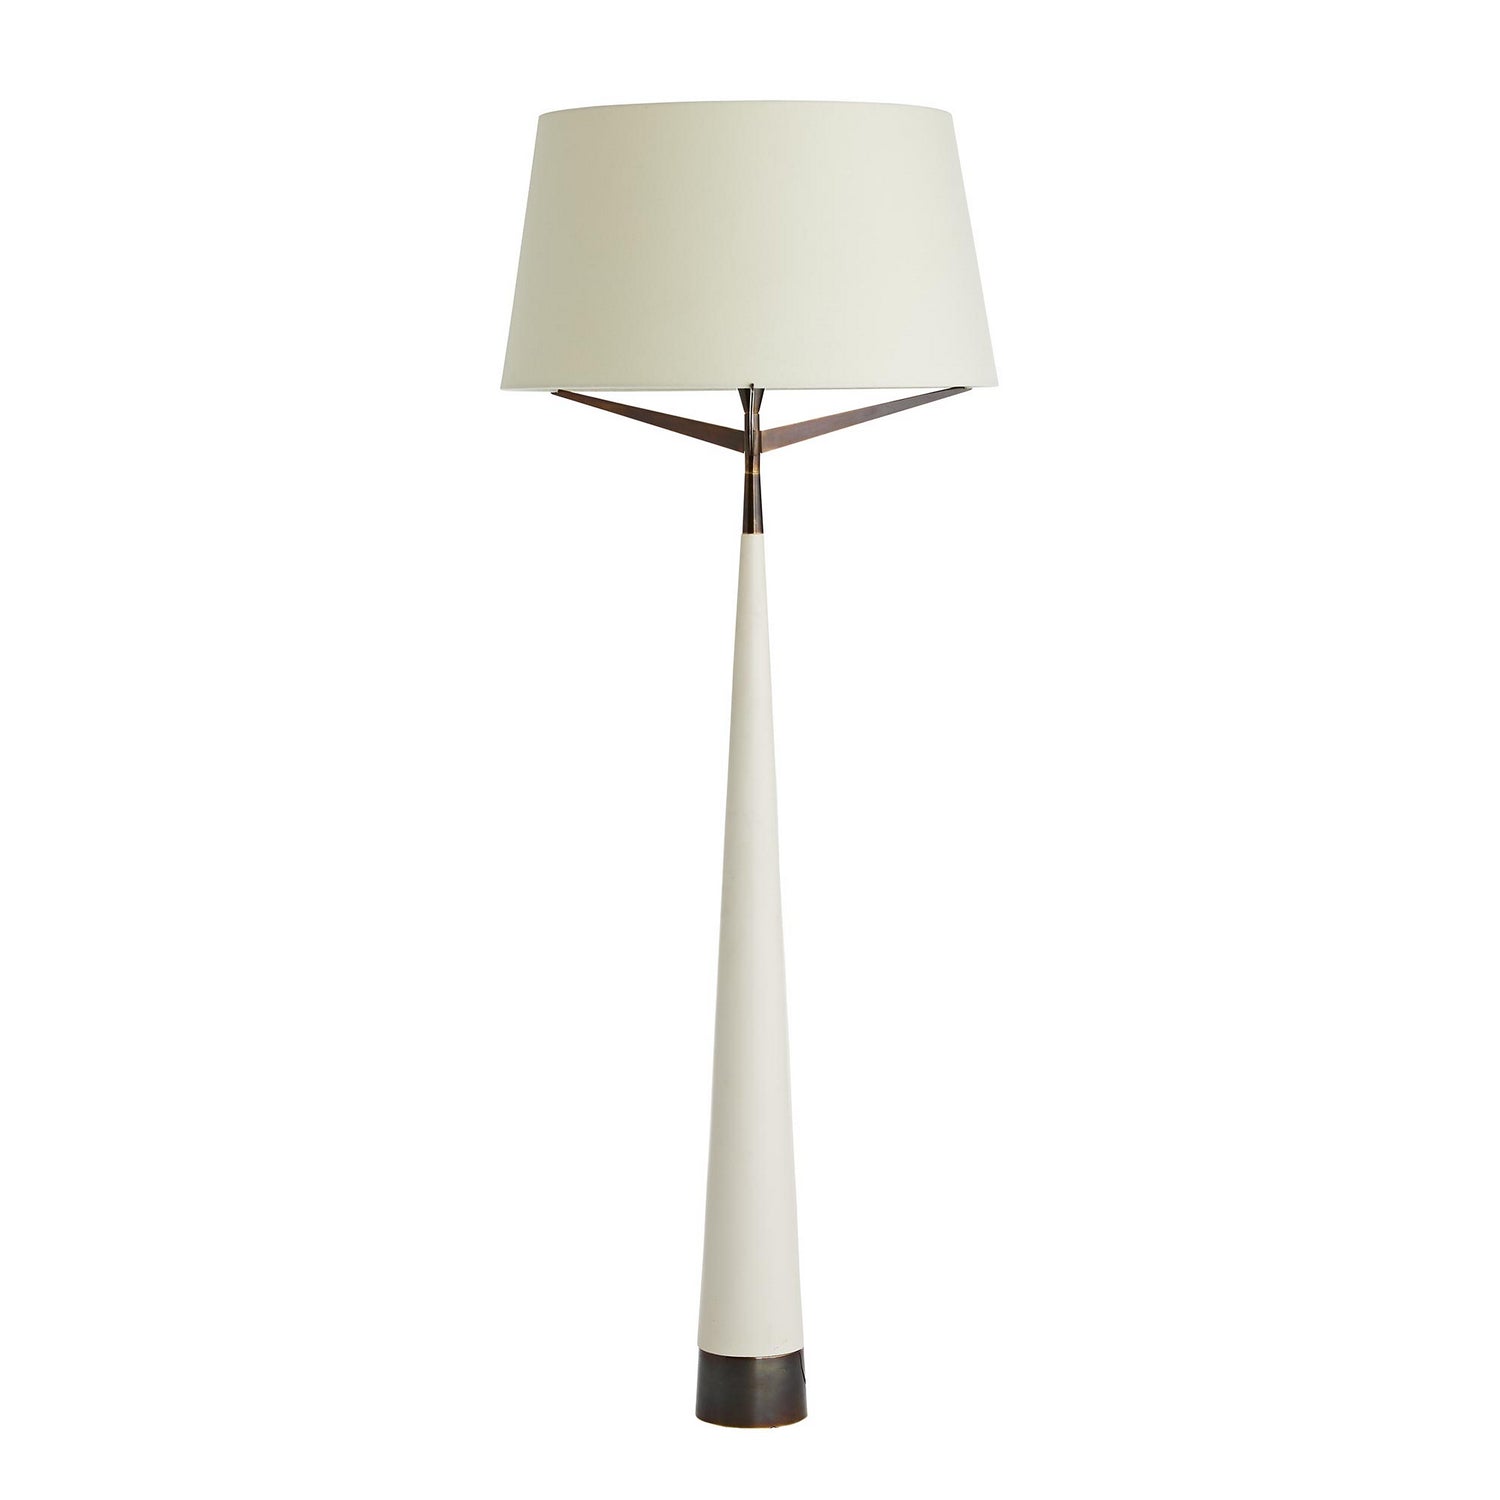 One Light Floor Lamp from the Elden collection in Ivory finish